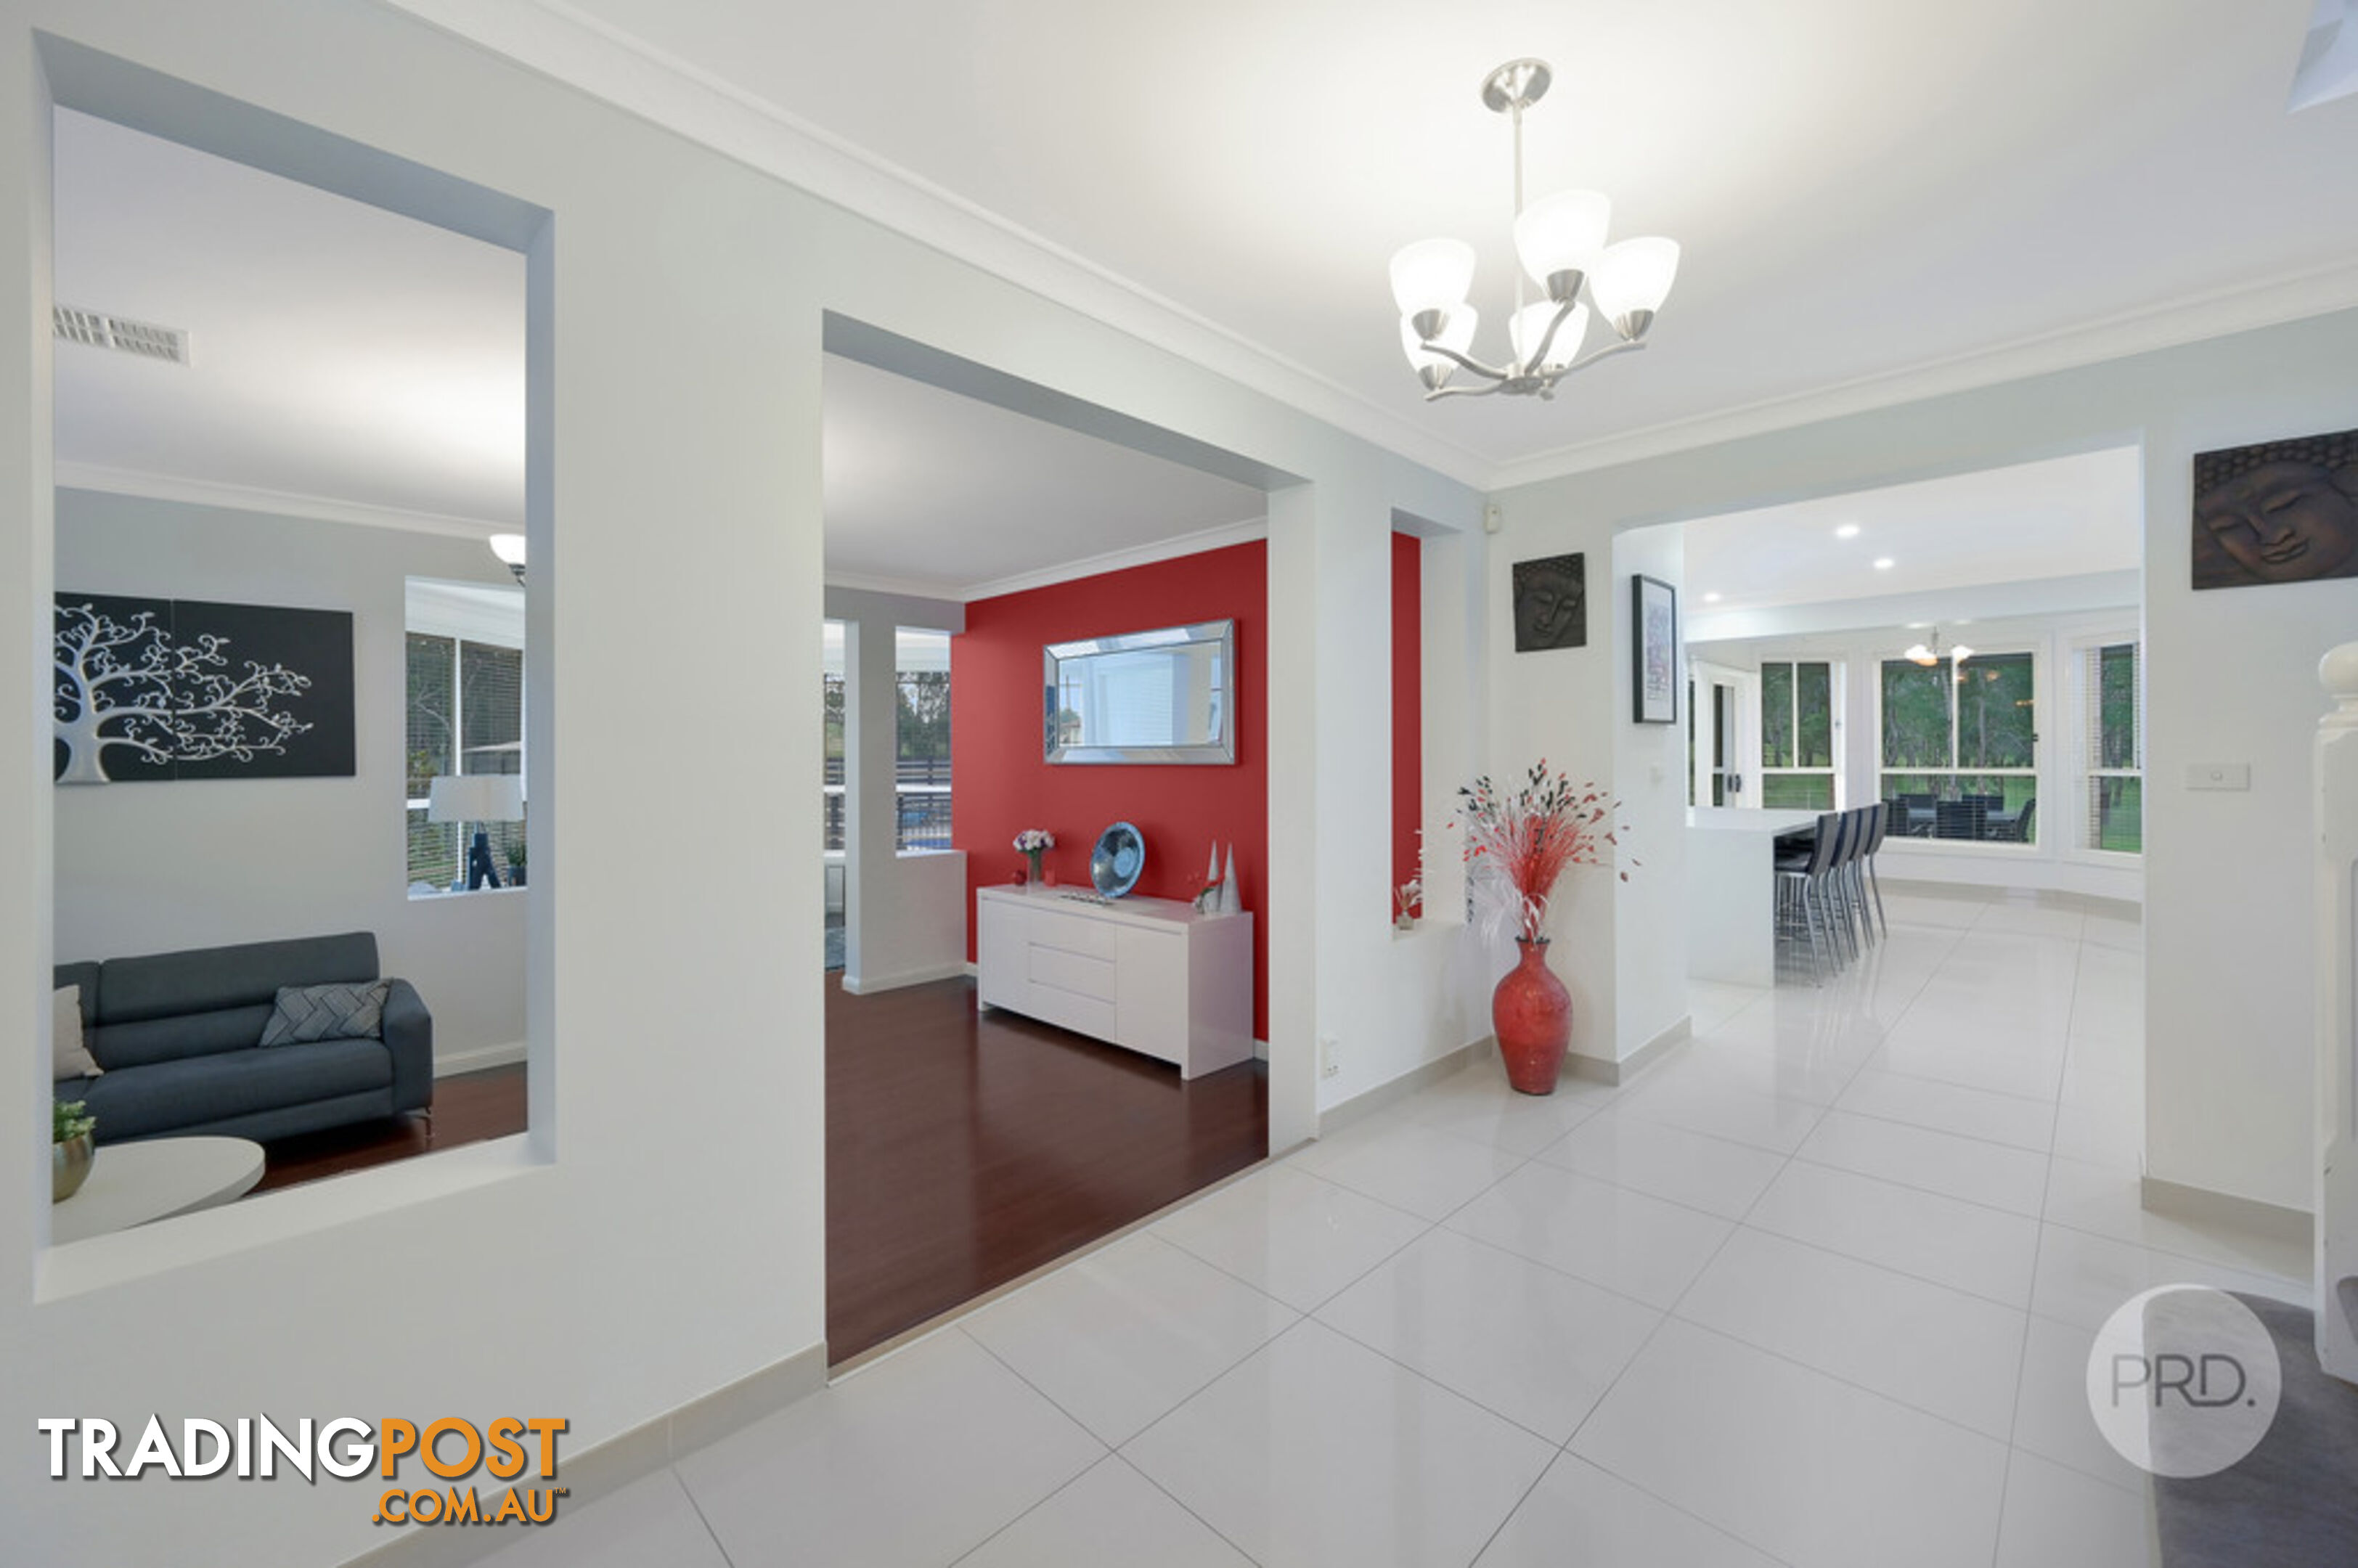 80 Muscatel Way ORCHARD HILLS NSW 2748